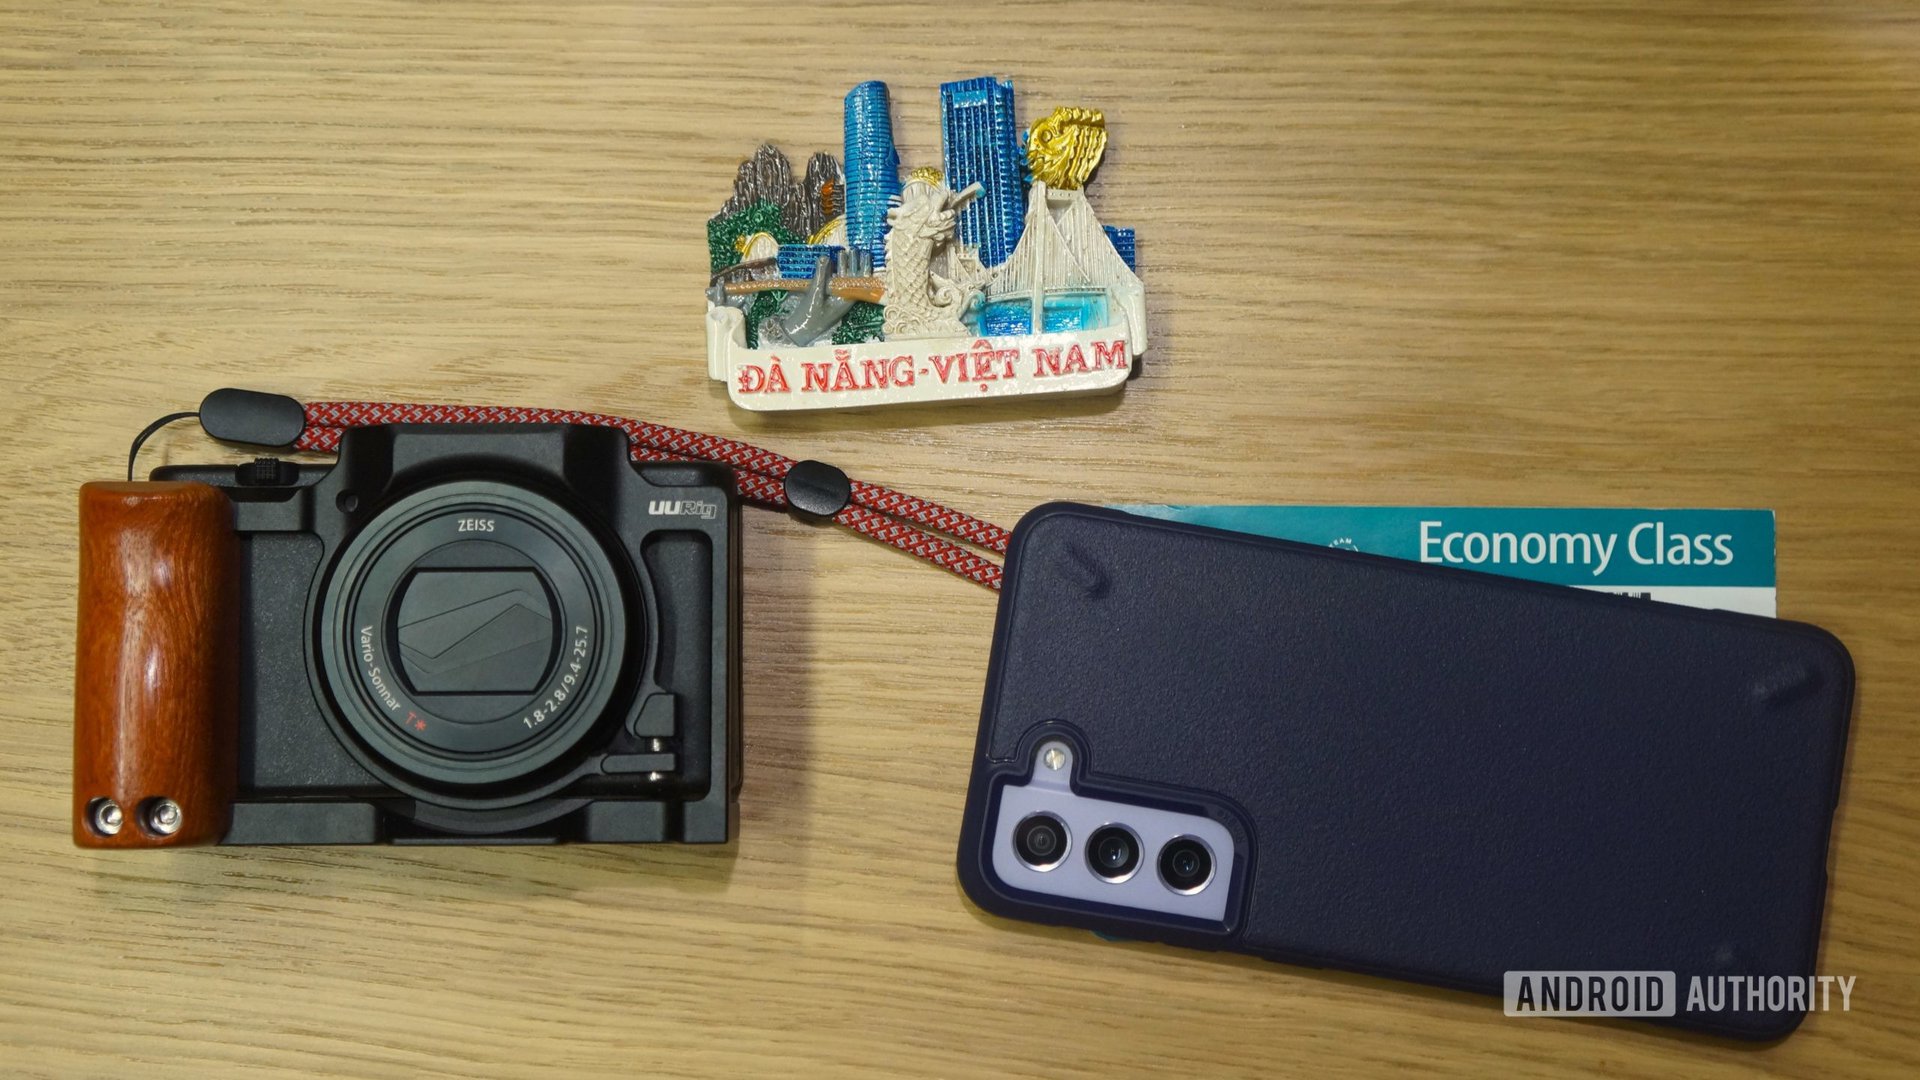 I took Sony’s best pocket camera on vacation and regretted it